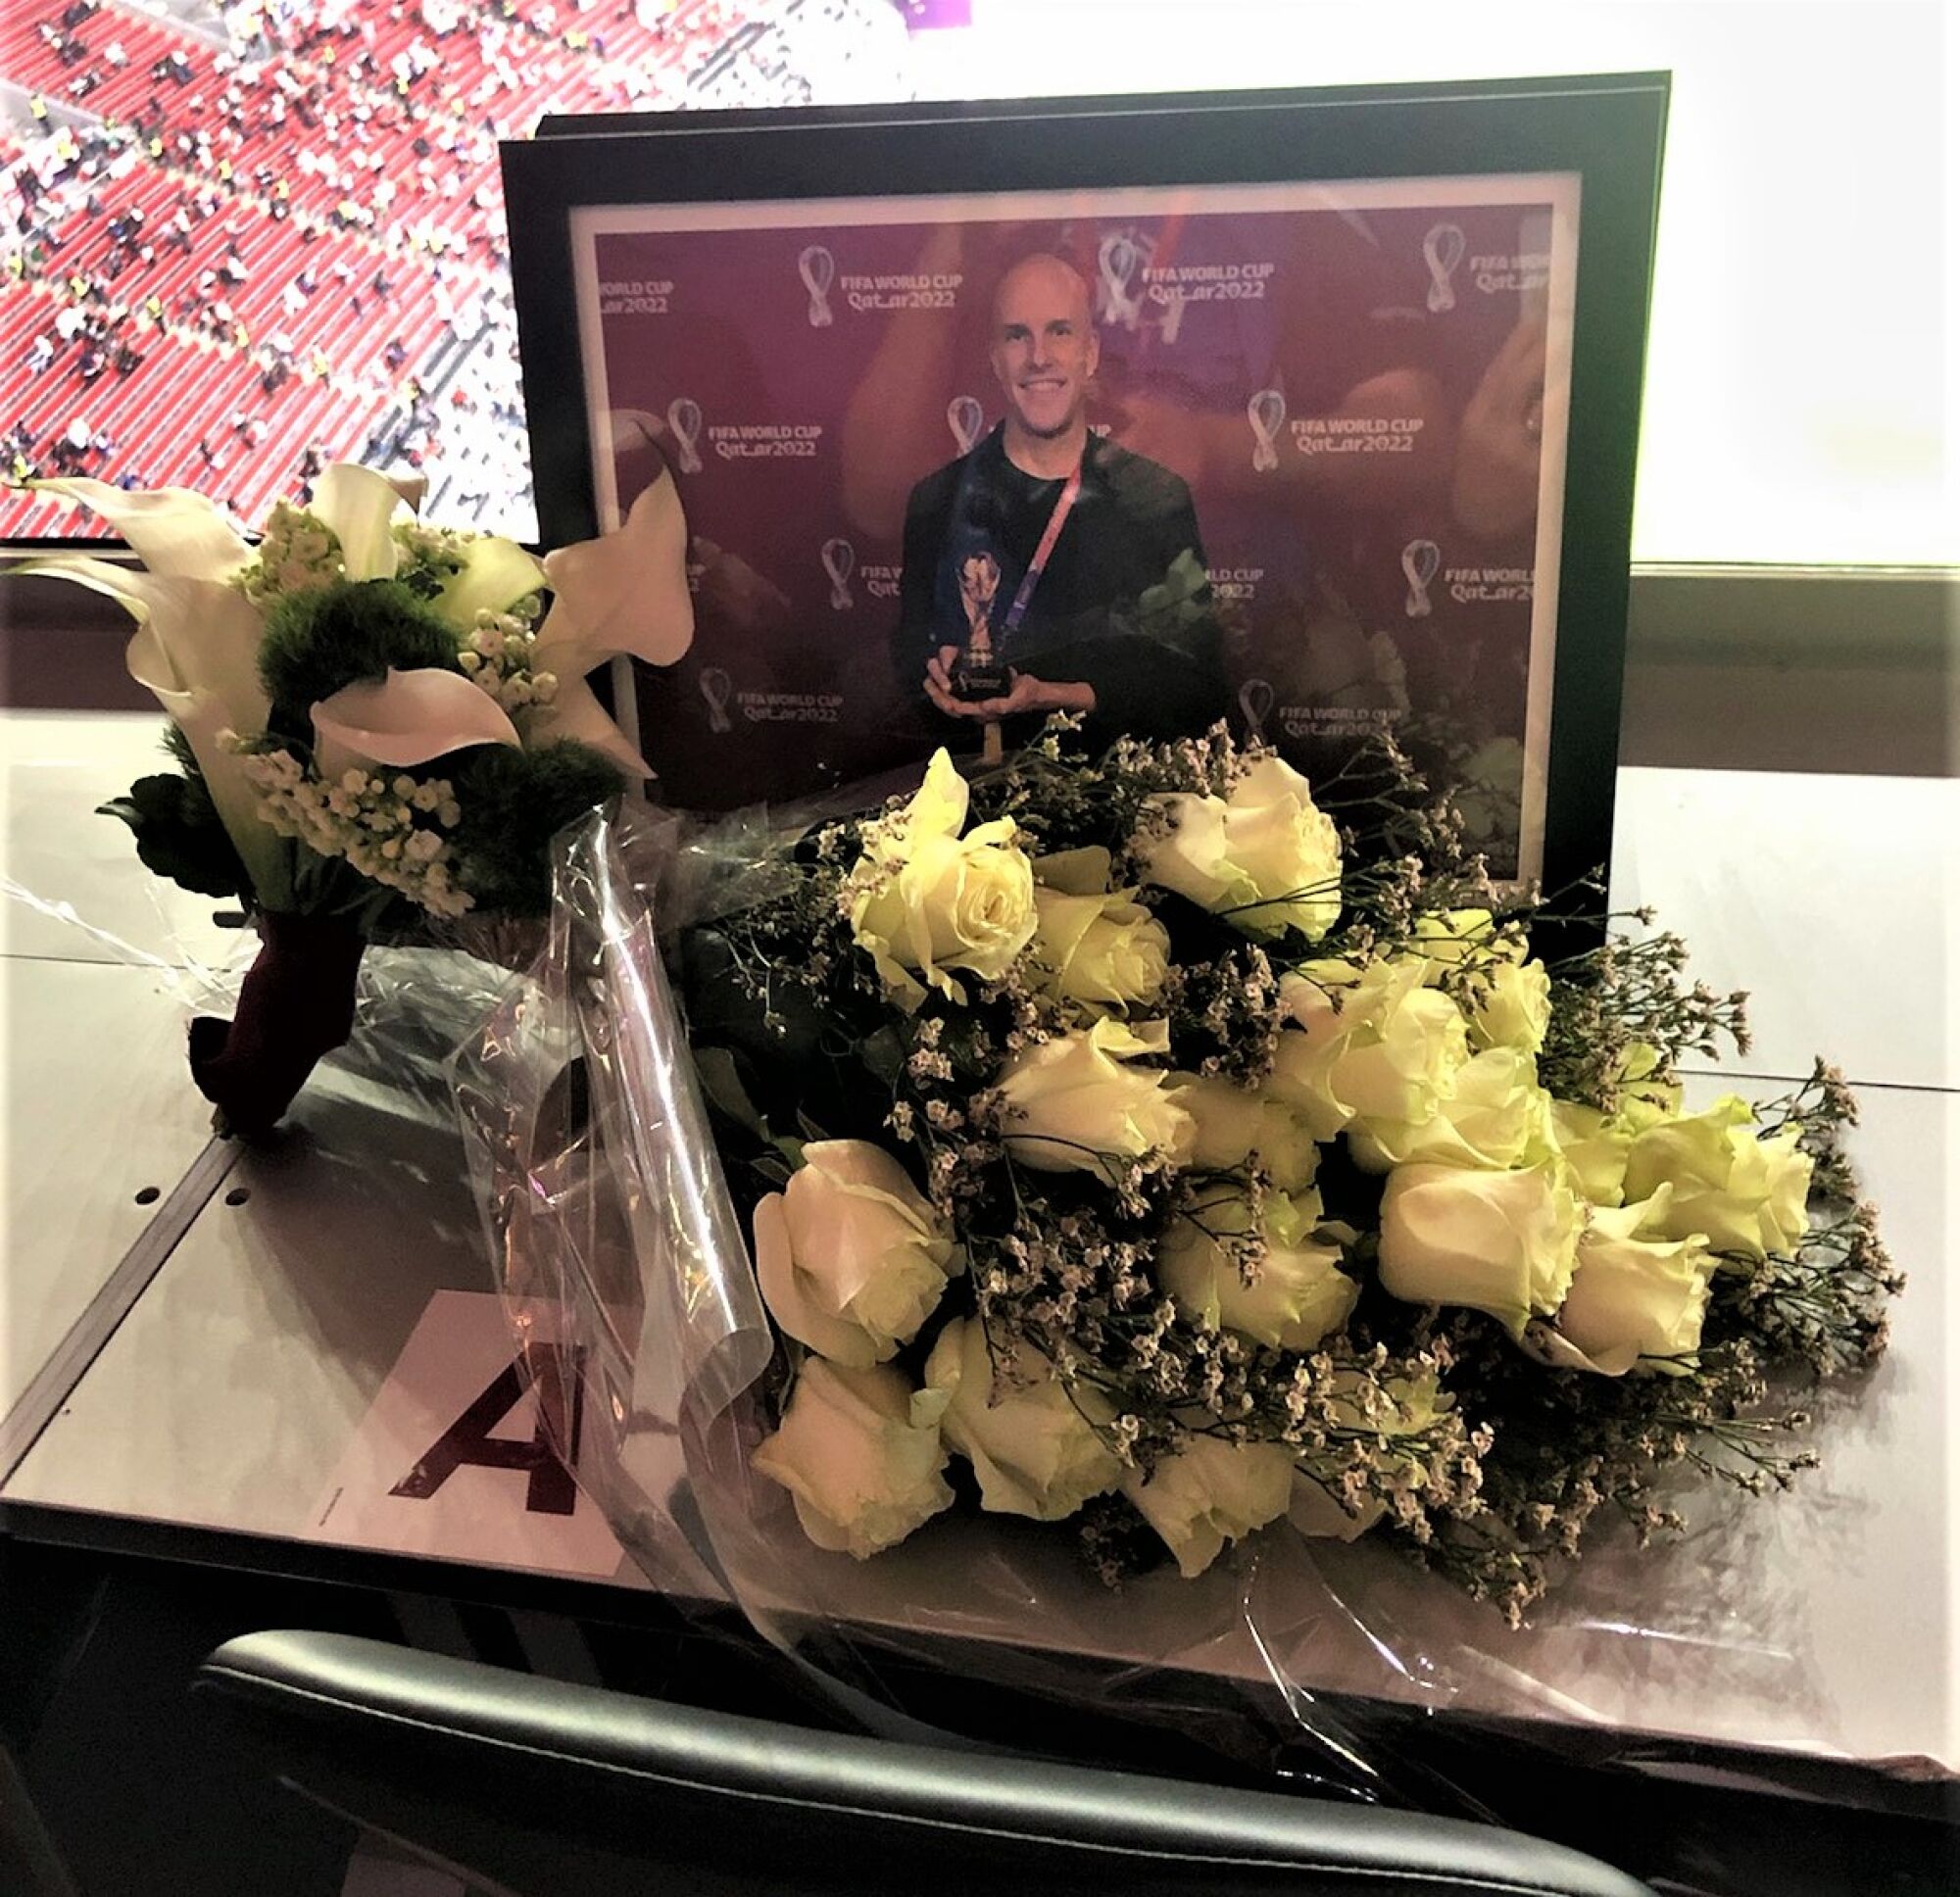 FIFA set up a flowers and a photo honoring journalist Grant Wahl at his assigned World Cup seat 